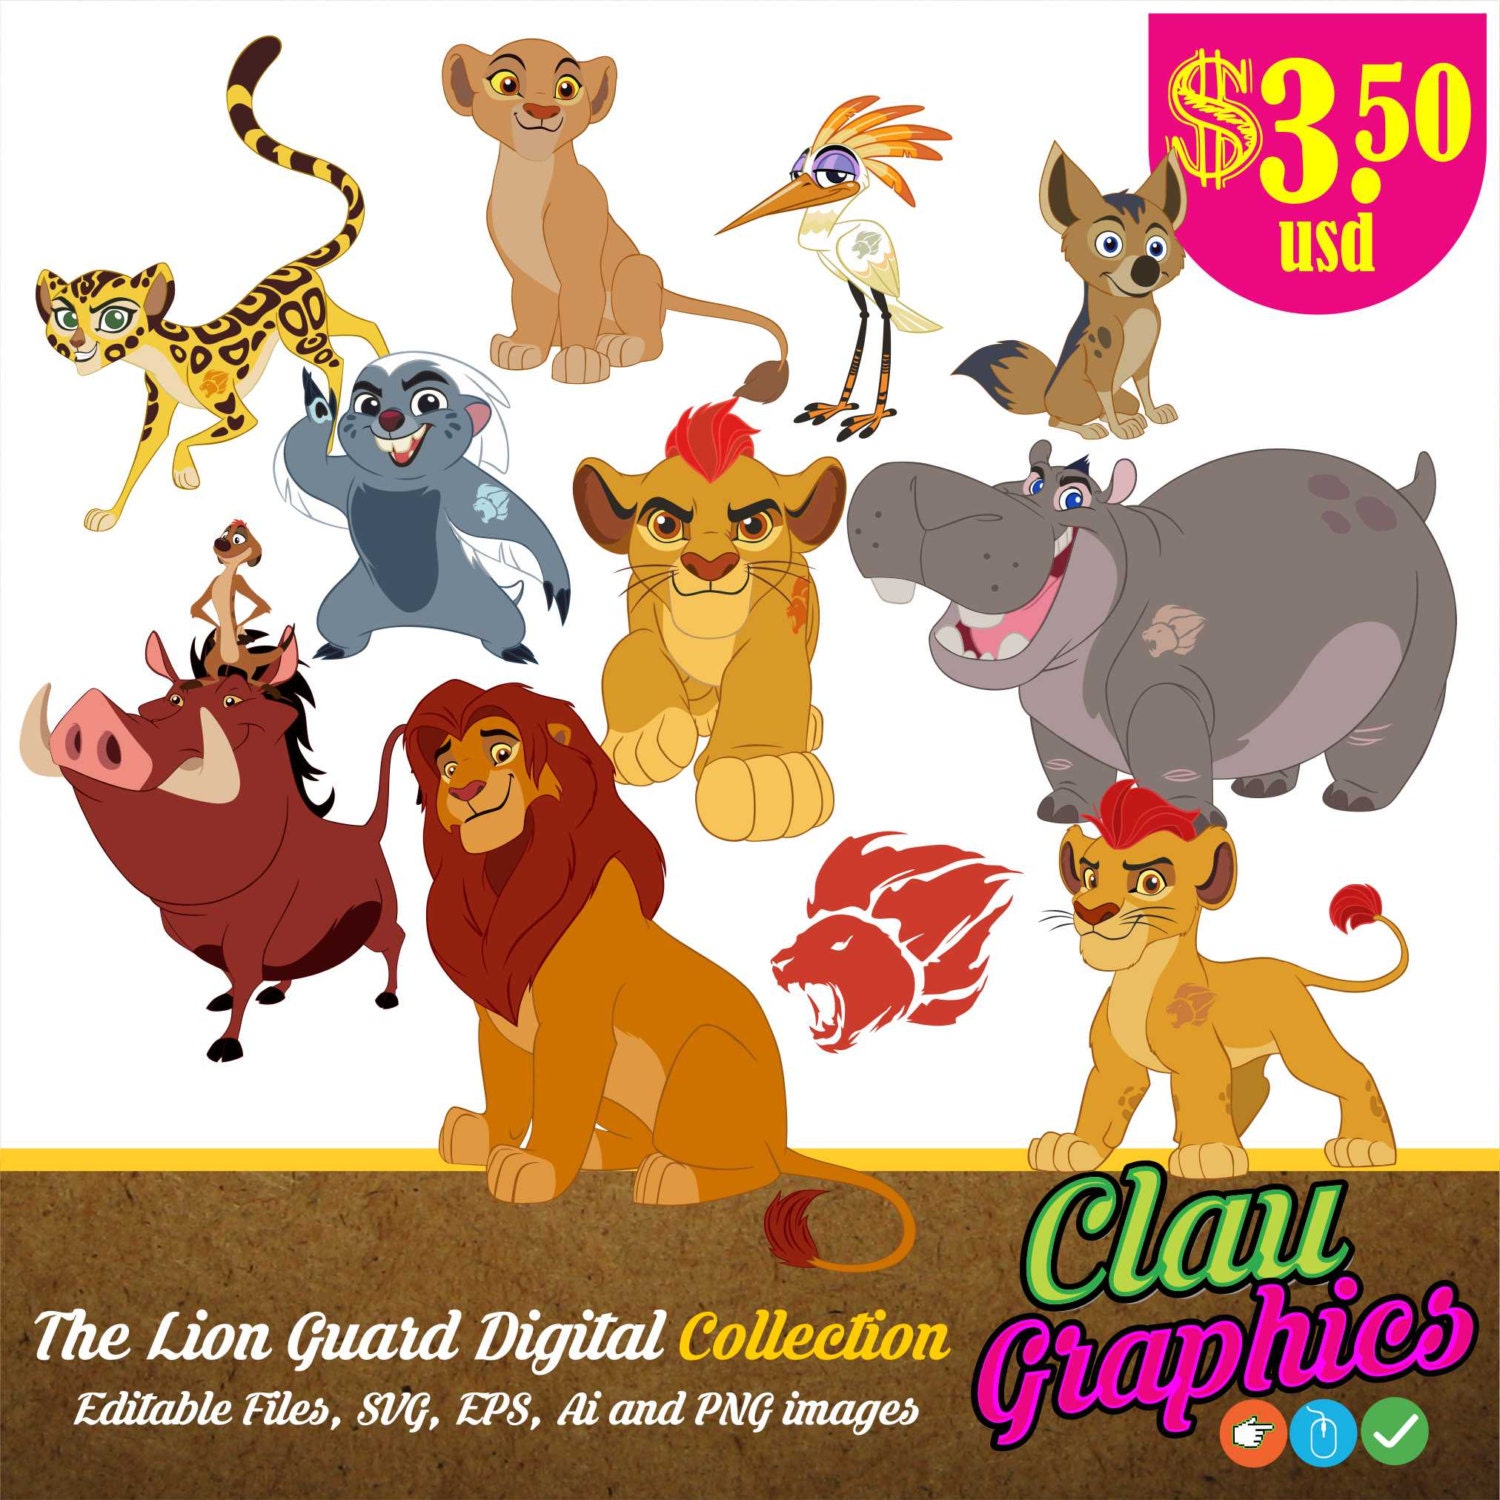 The Lion Guard Digital Drawing Receive the editable files on